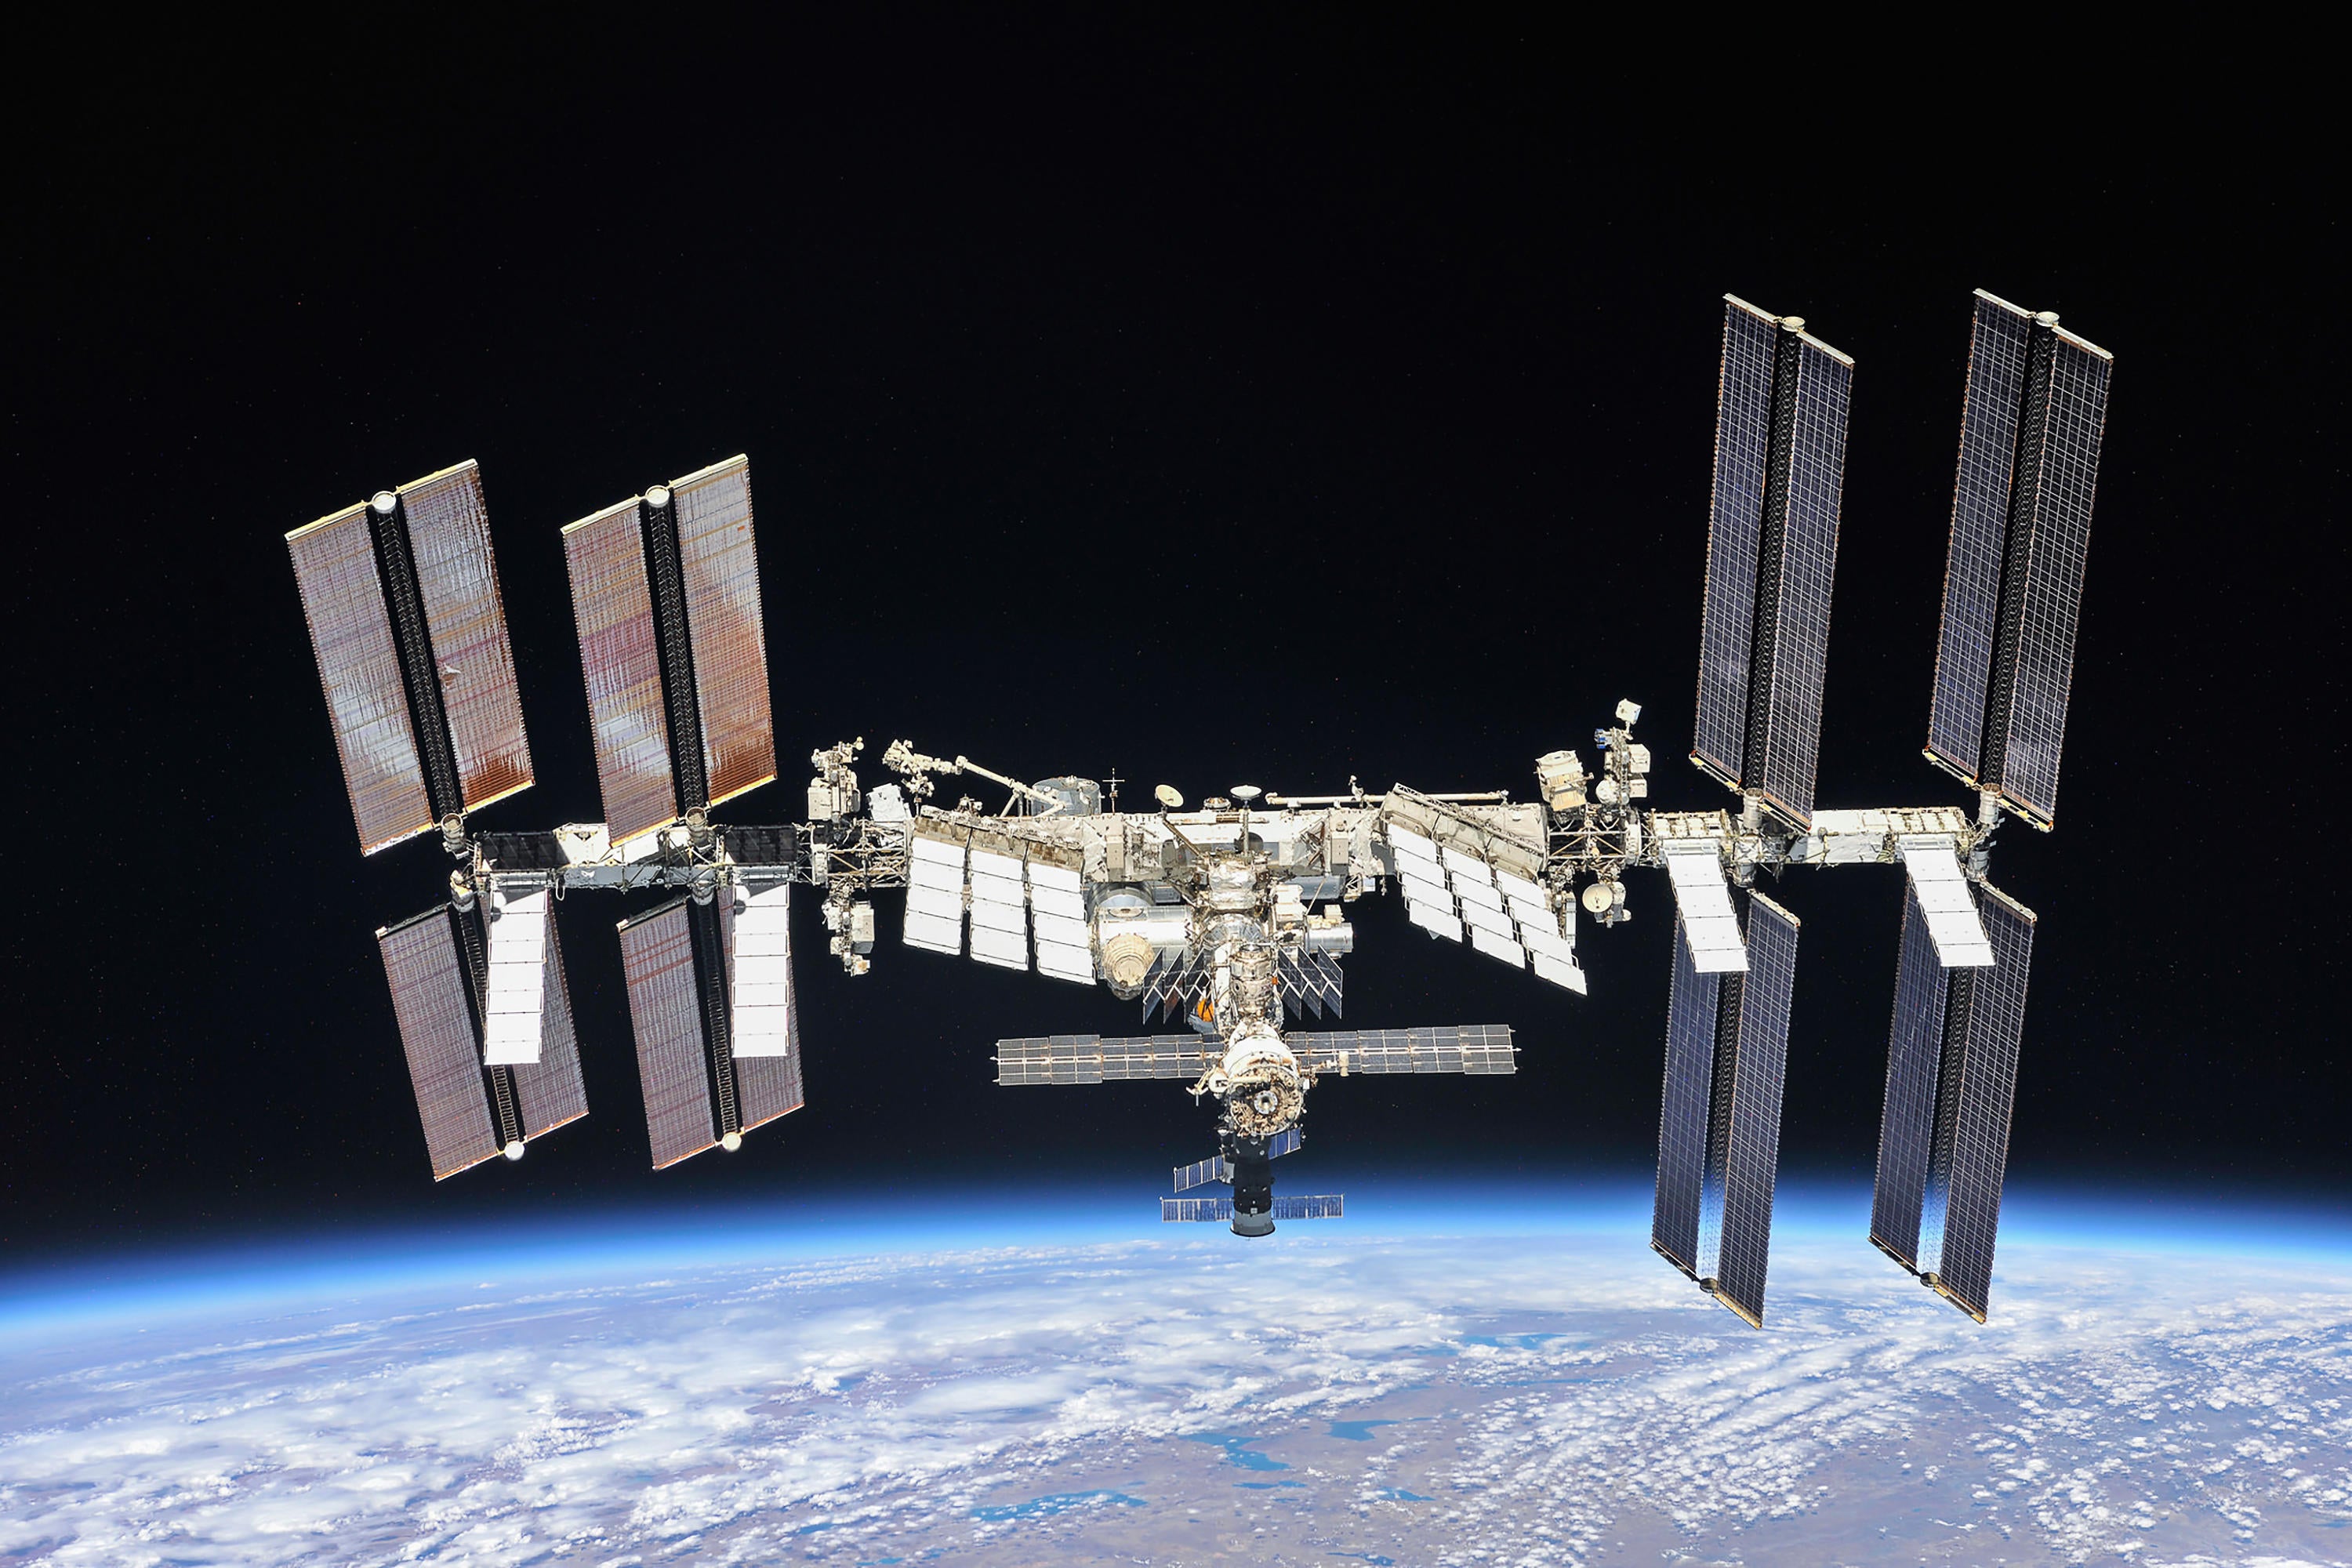 International Space Station Suffers Leak, But Crew Remains Safe